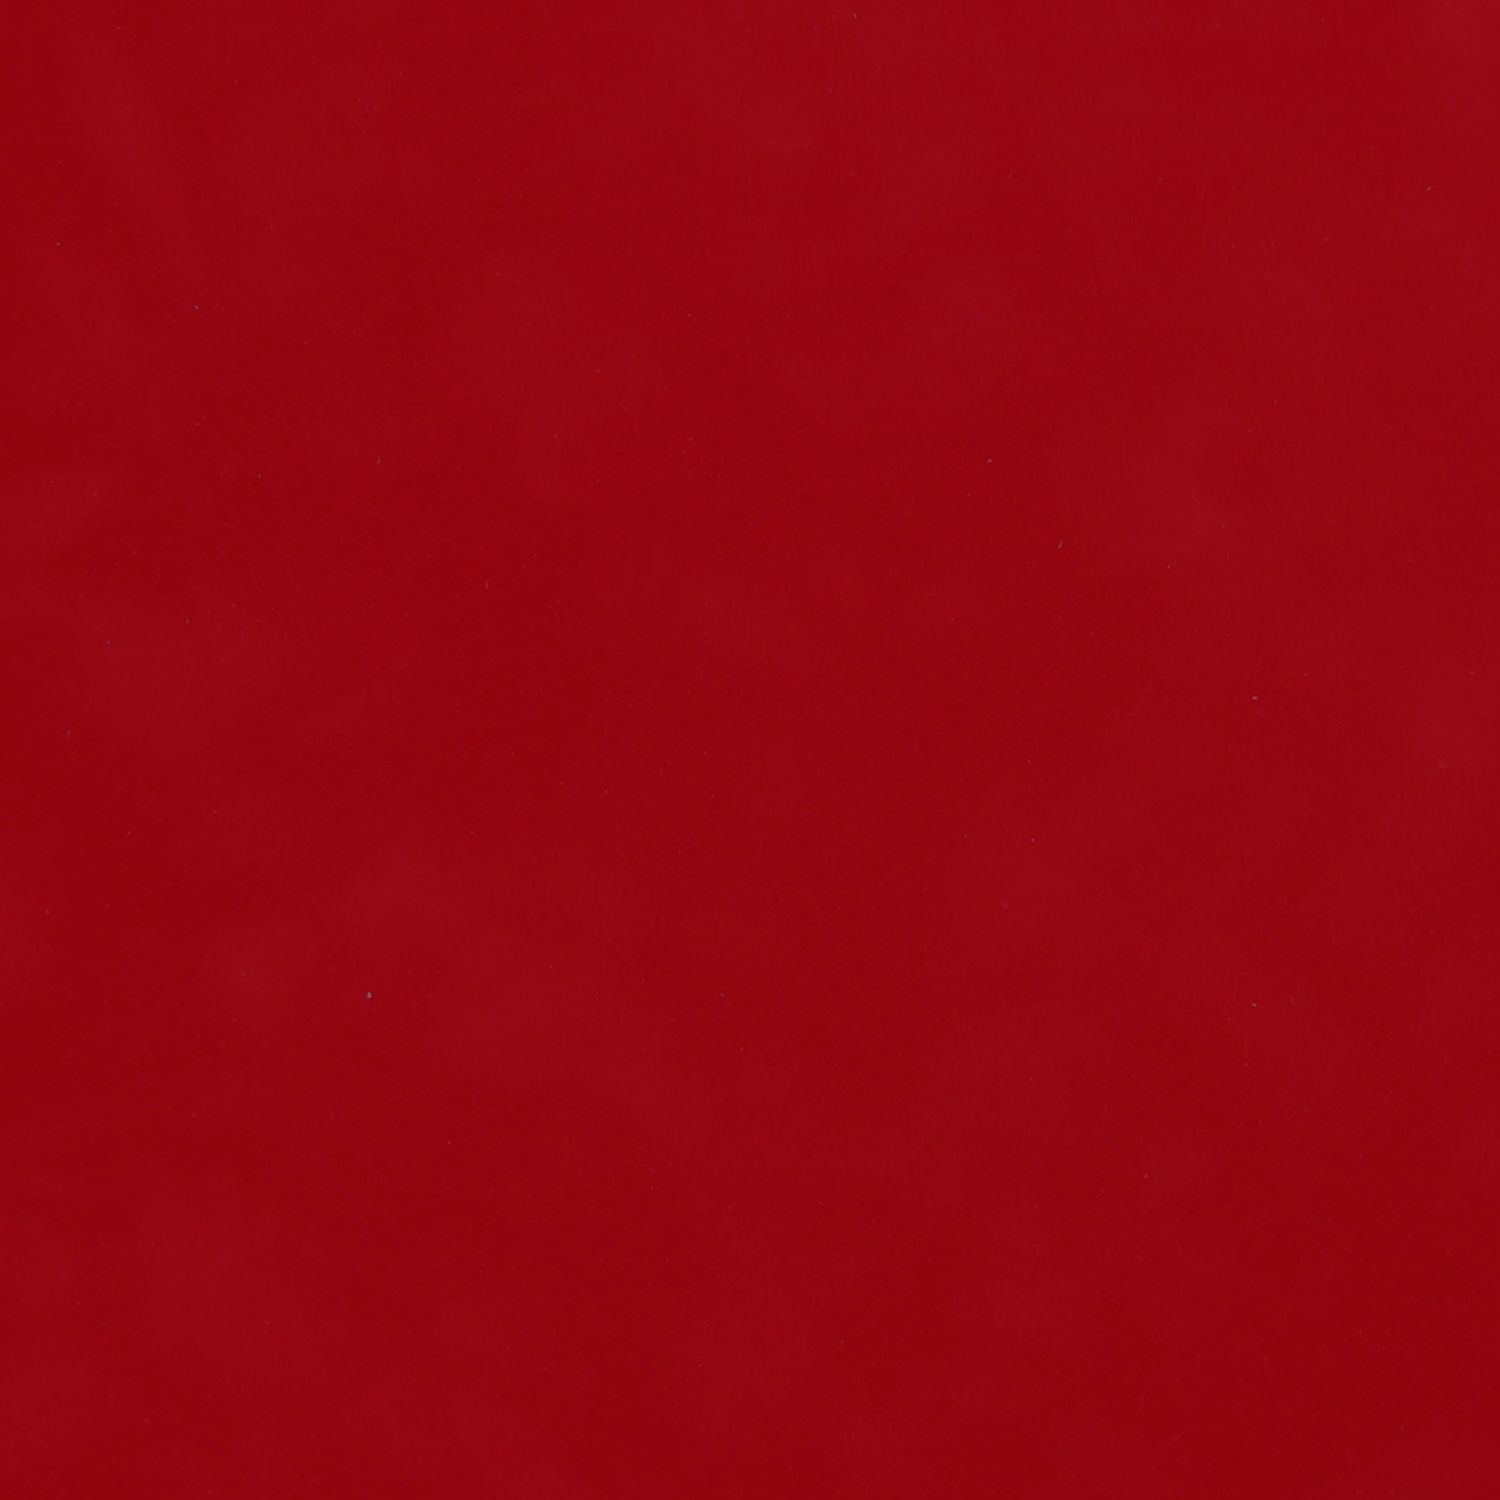 Solid red background. Tops Wallpaper Gallery